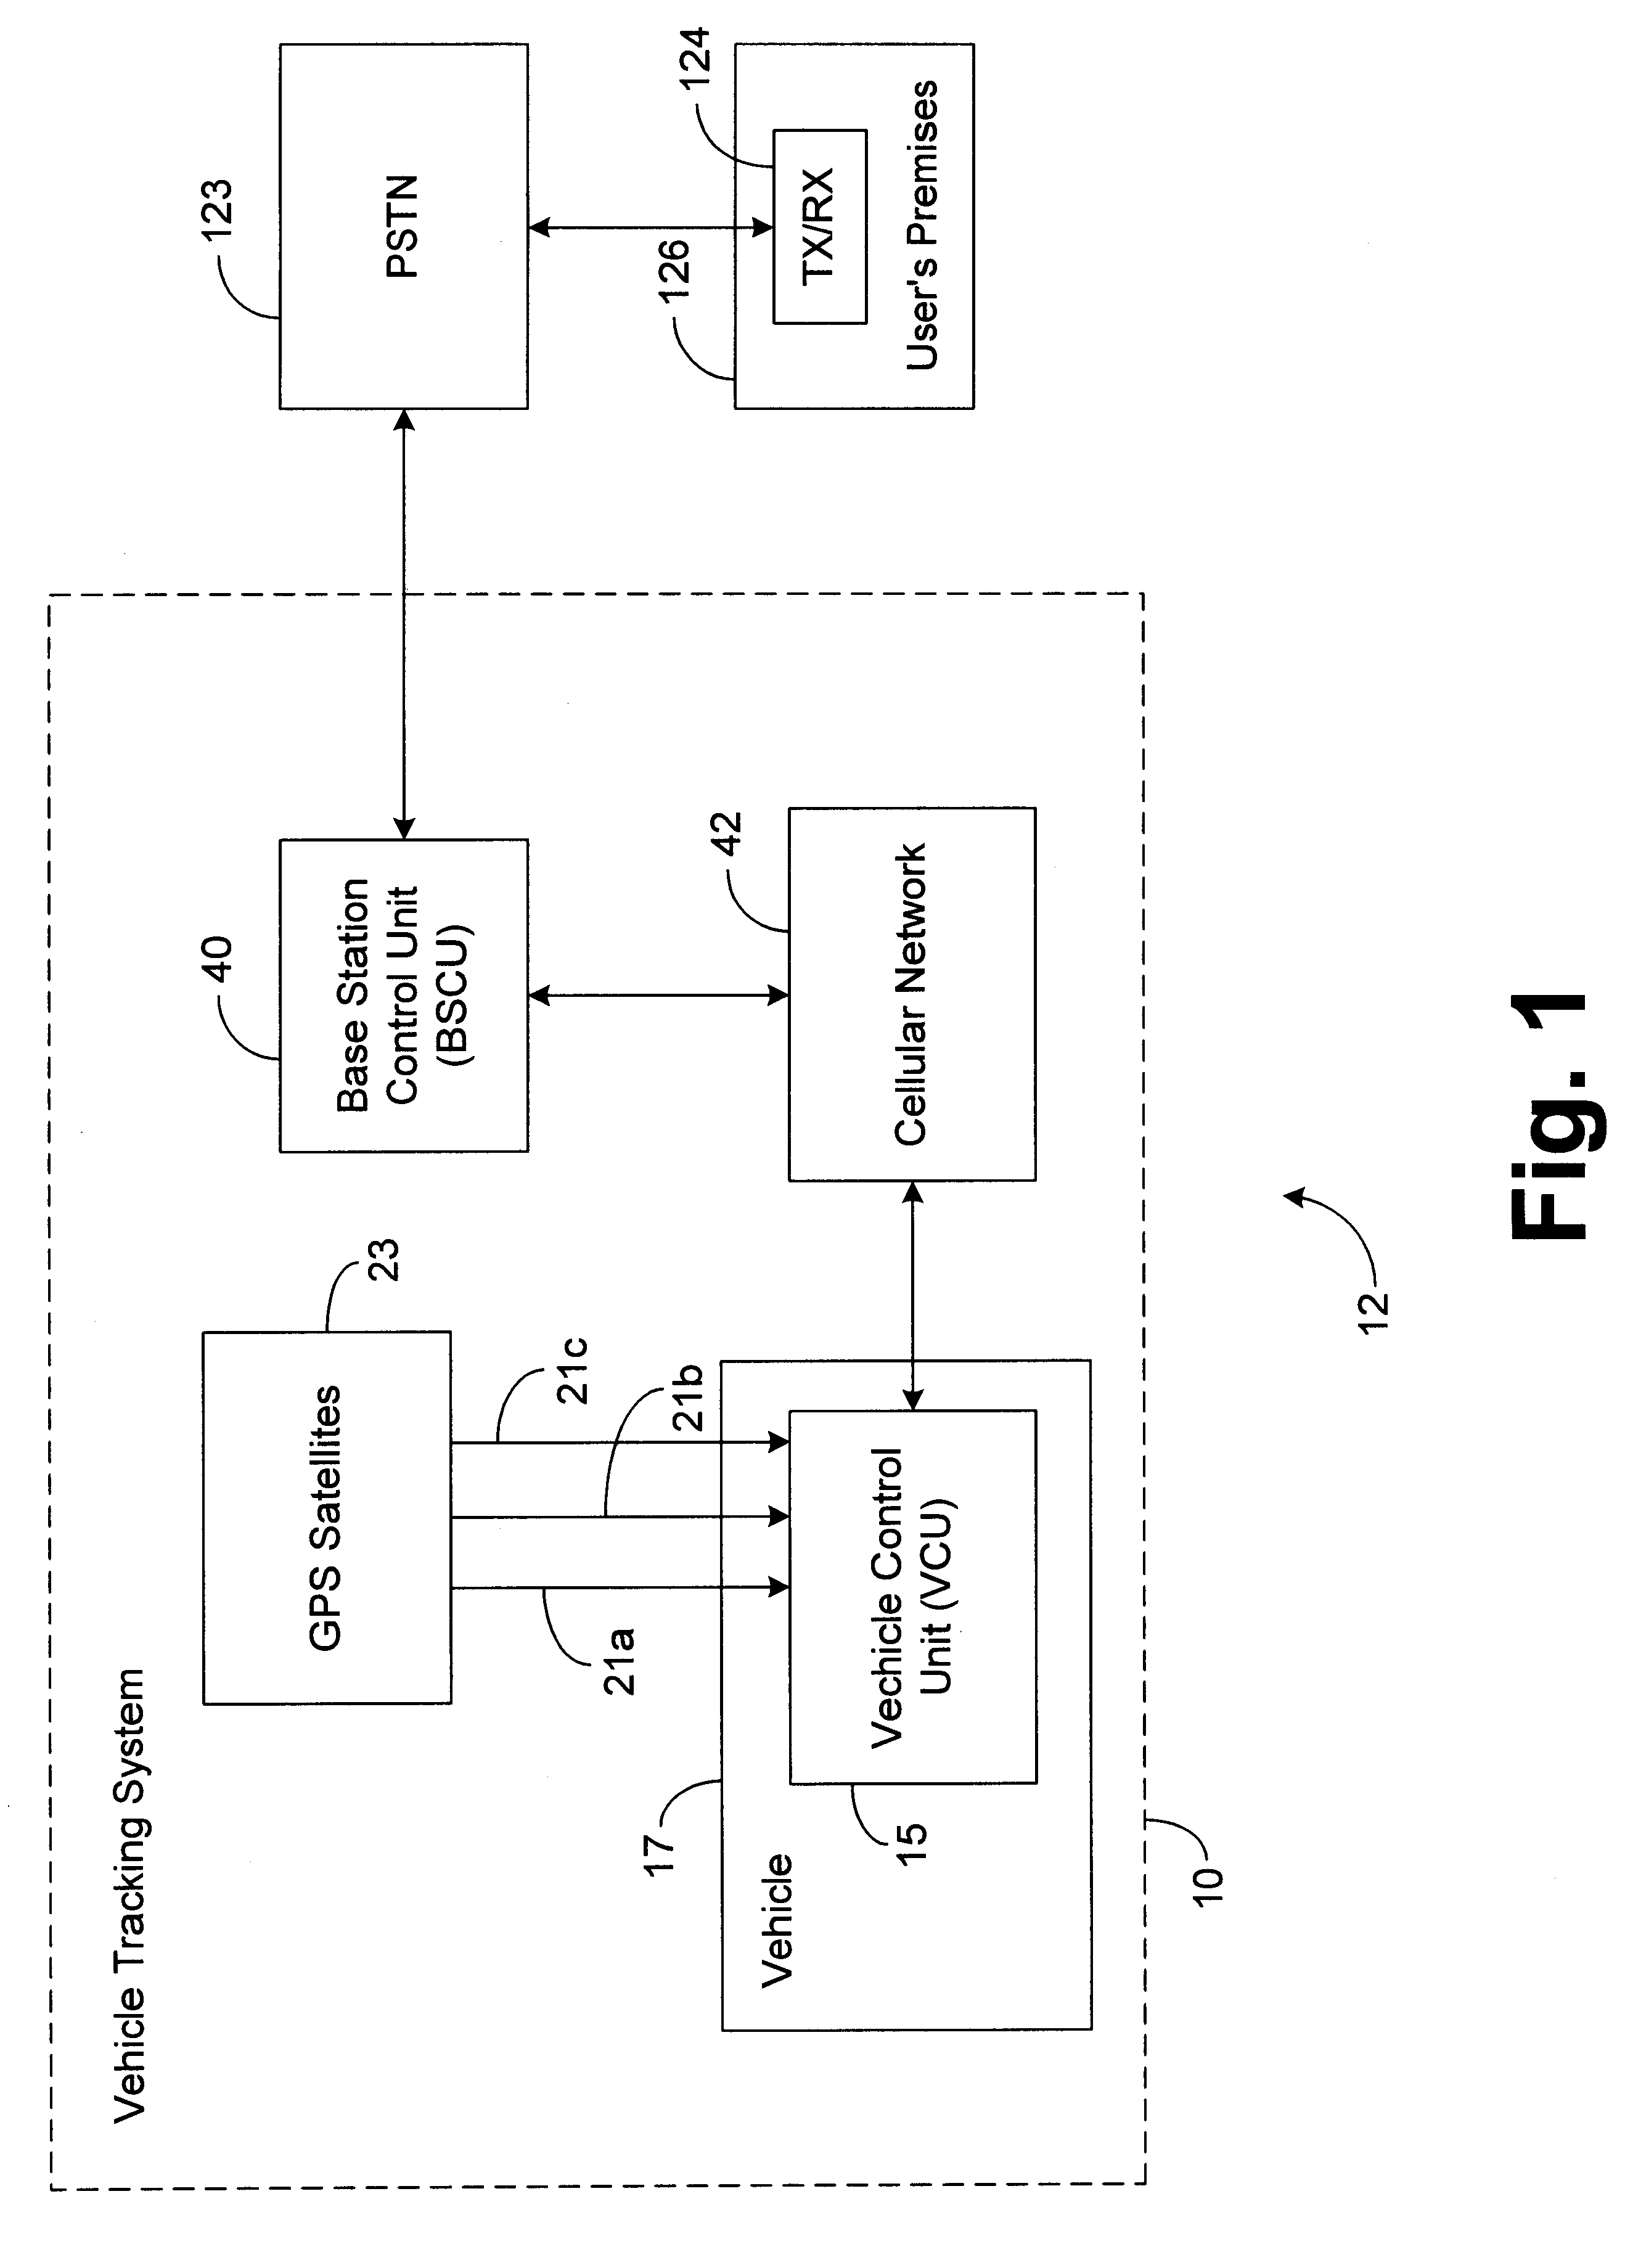 Base station system and method for monitoring travel of mobile vehicles and communicating notification messages